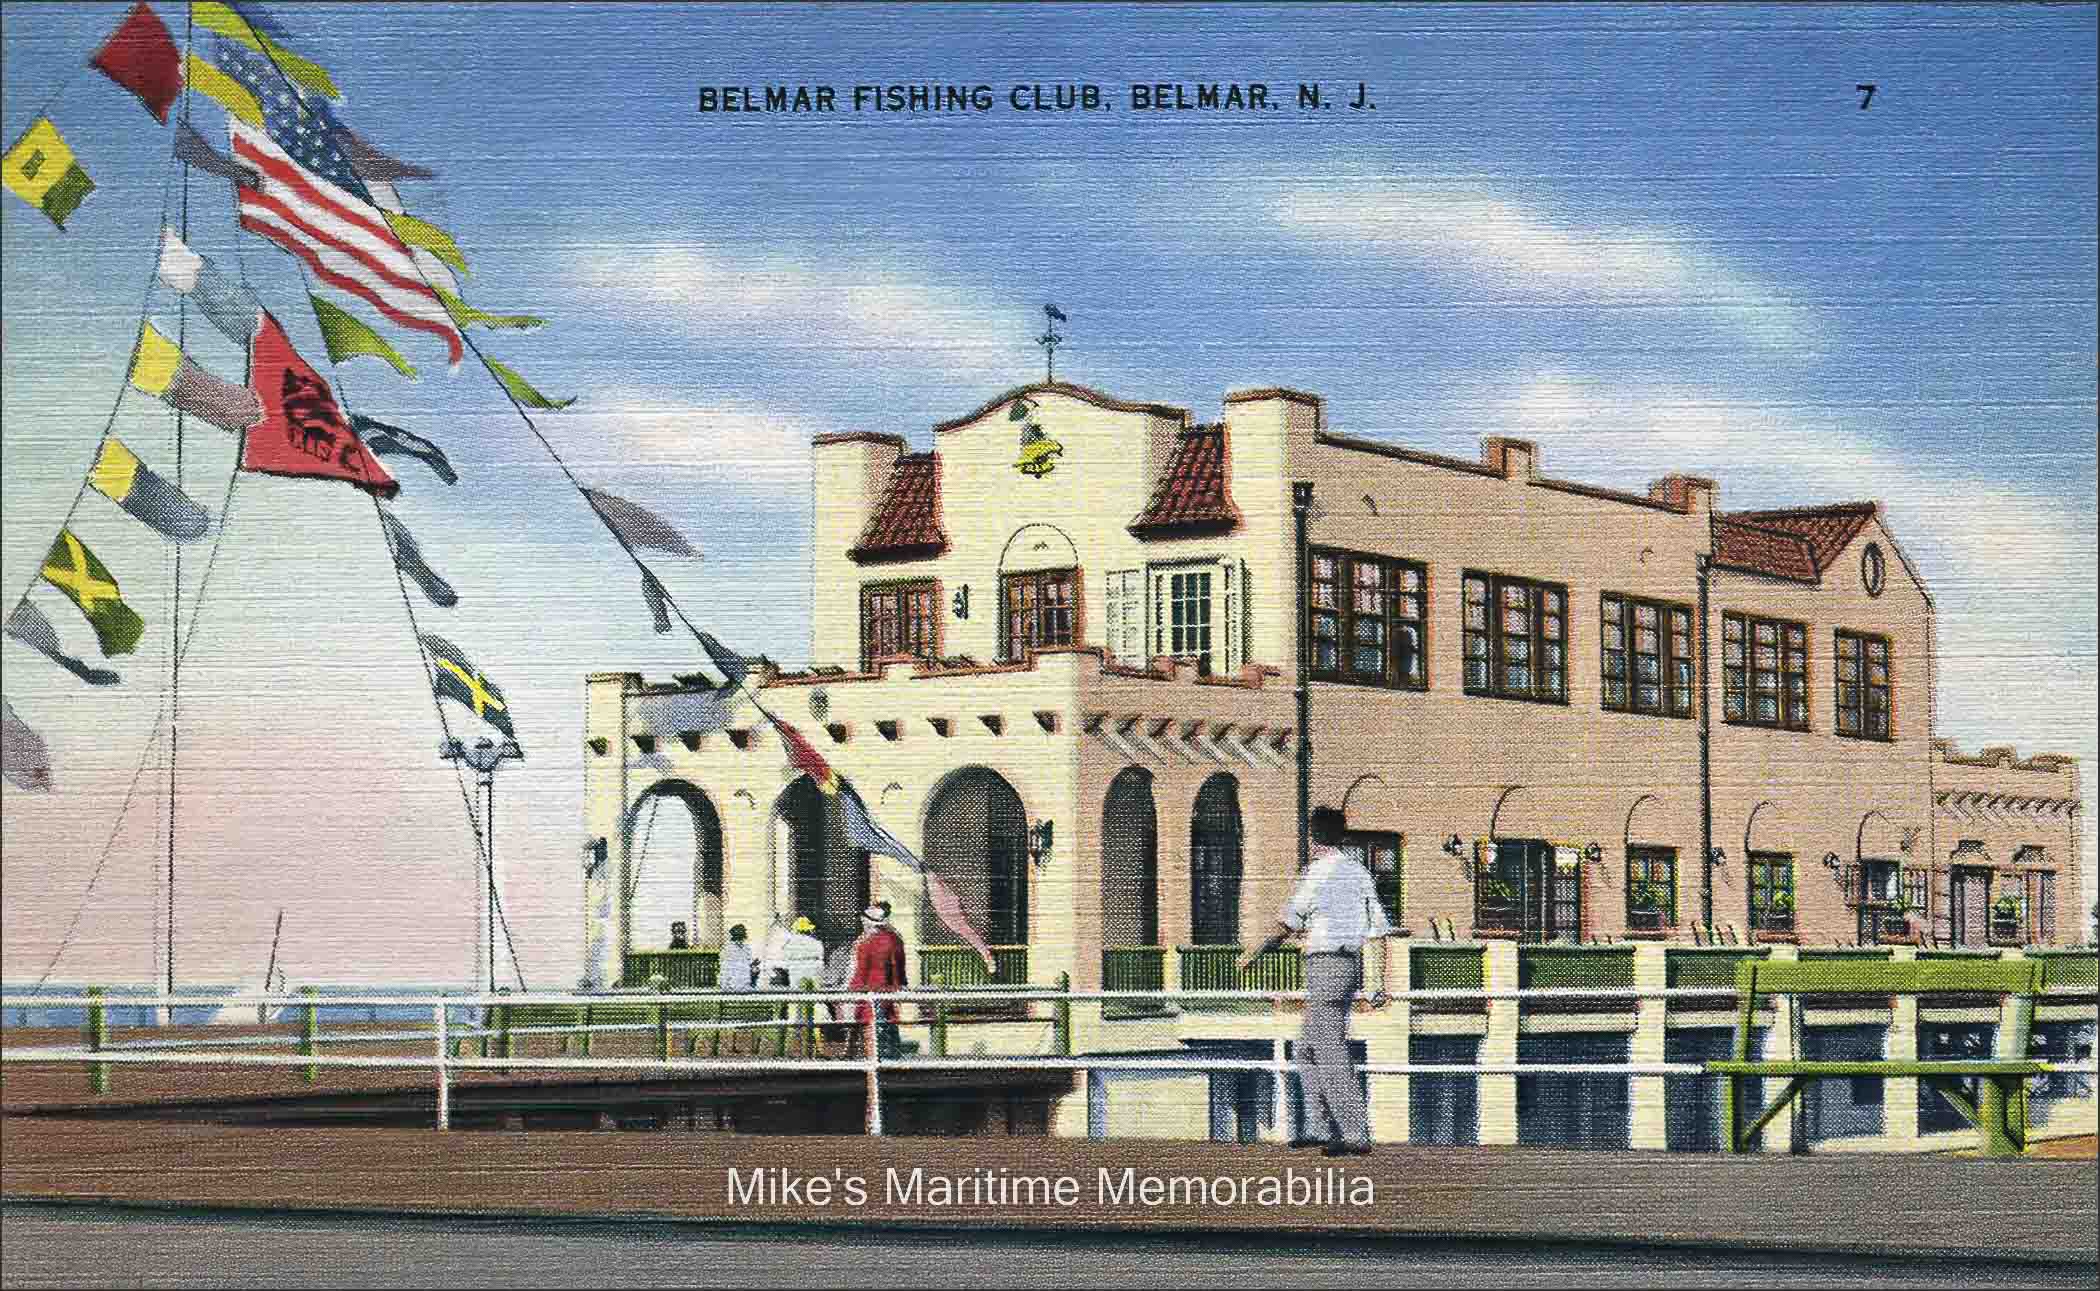 Belmar Fishing Club, Belmar, NJ – 1947 The Belmar Fishing Club was first organized on September 1, 1909 with forty-nine charter members. Annual dues were set at only $1. Soon after, arrangements were made with the Ocean Pier Company to construct a clubroom and for the use of an existing pier. In order to provide a meeting place, the Ocean Pier Company built the original clubroom at the foot of the pier. In 1929, the Club built a new and larger clubhouse to meet the demands of its growing membership. Although the pier has been the victim of many ocean storms over the years and had to be rebuilt and repaired on numerous occasions, the clubhouse at 100 Ocean Ave. remains intact and has changed very little.